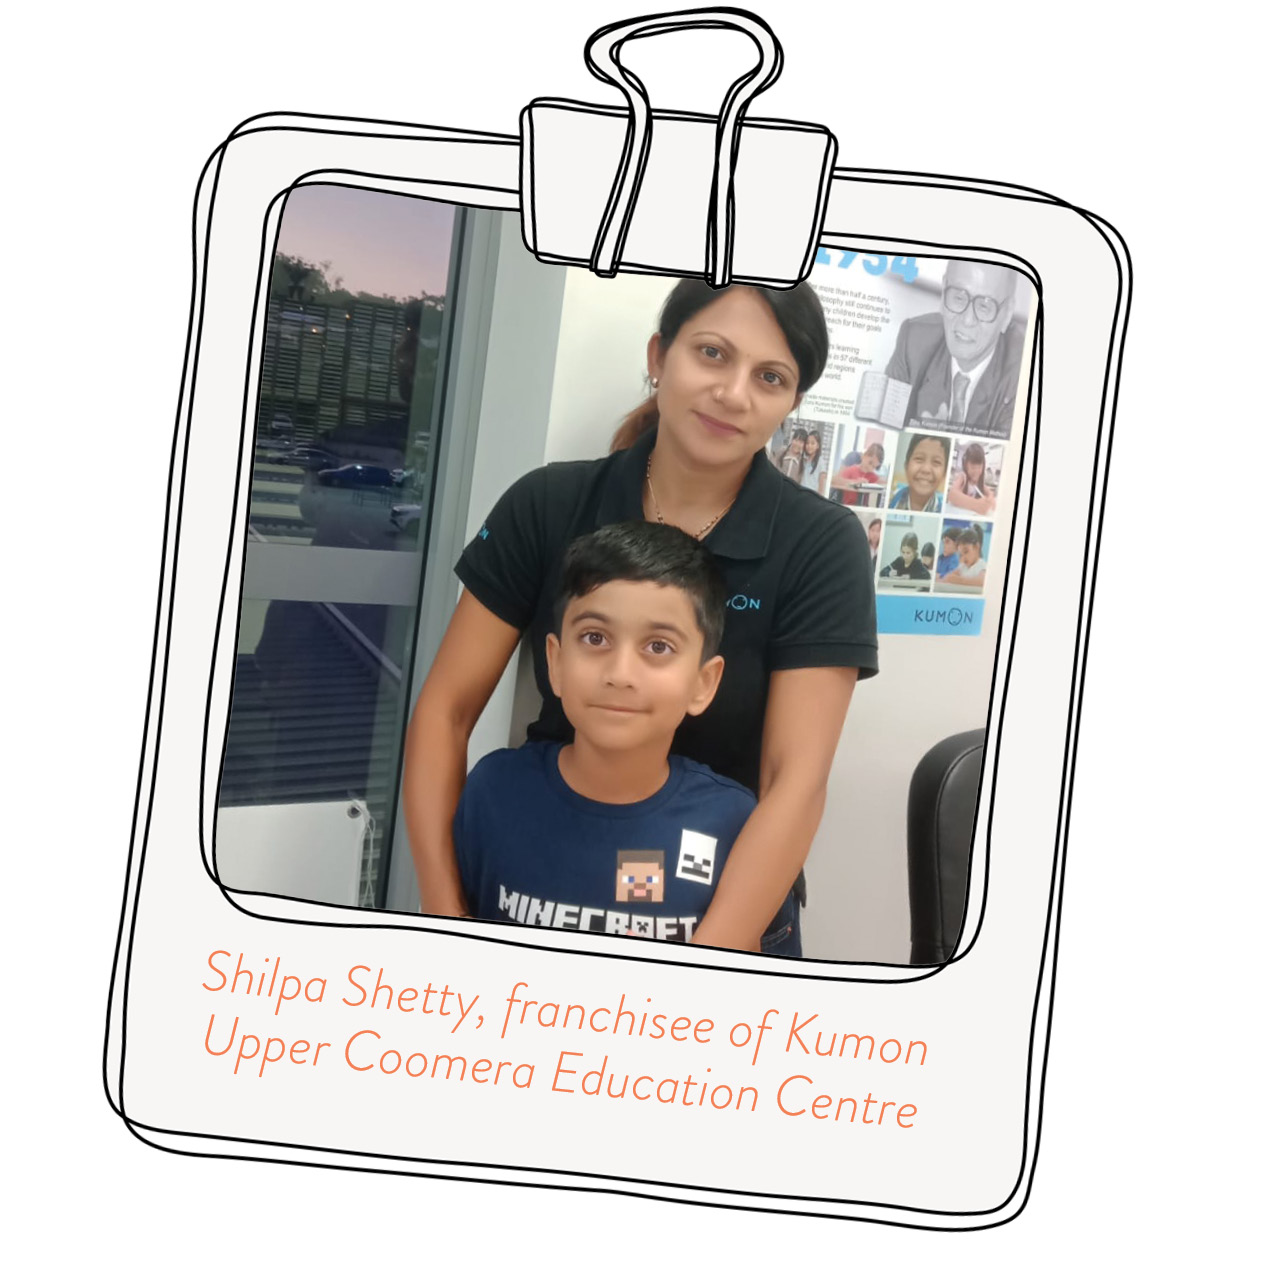 Franchisee at Kumon Upper Commera and her son